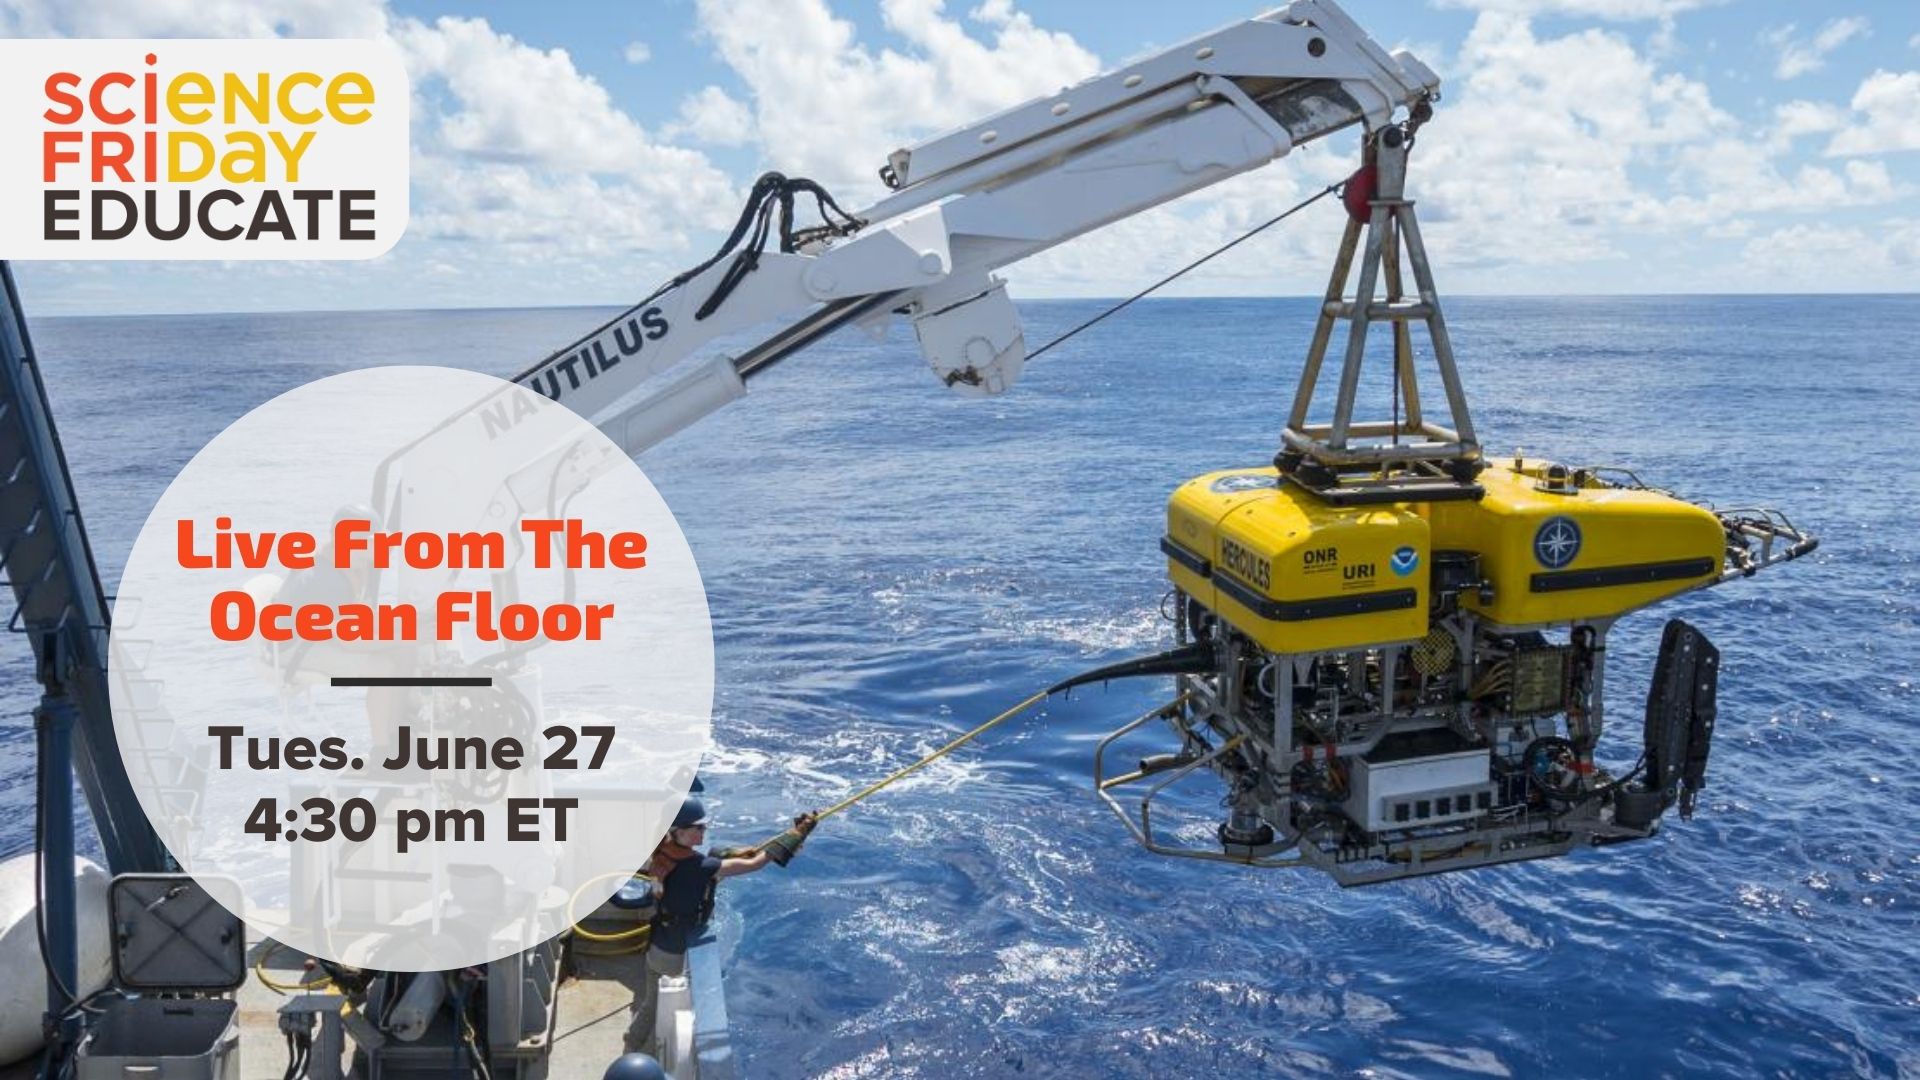 Event promotional image. A photograph of a remote operated vehicle being lowered into the ocean via crane, with the words "Live from the Ocean Floor. Tues. June 27, 4:30pm ET" appear on the side.